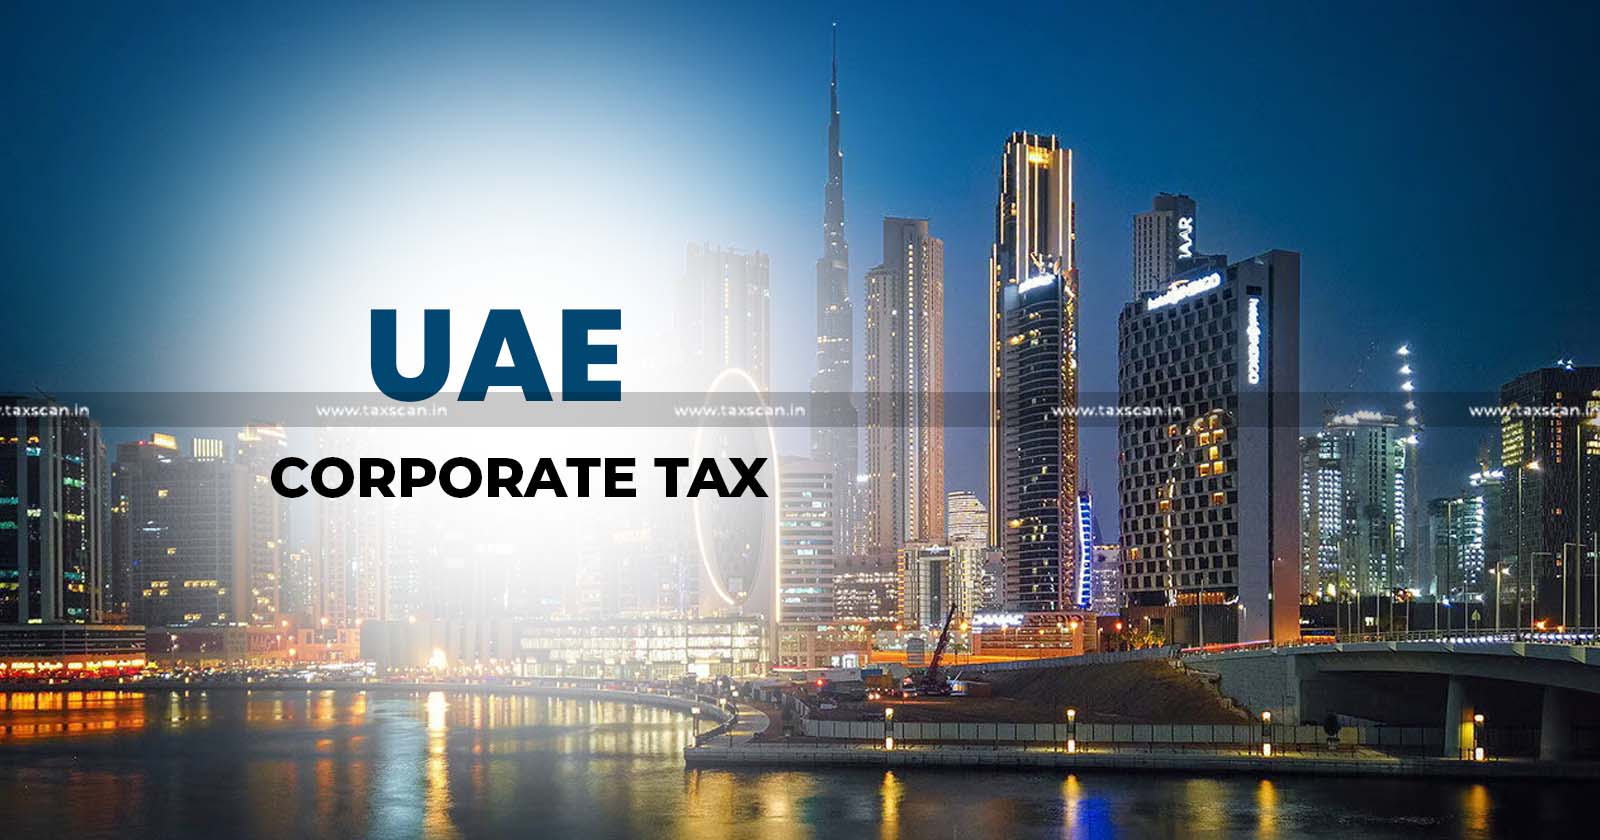 UAE to Implement Corporate Tax - Implement Corporate Tax - Corporate Tax - taxscan